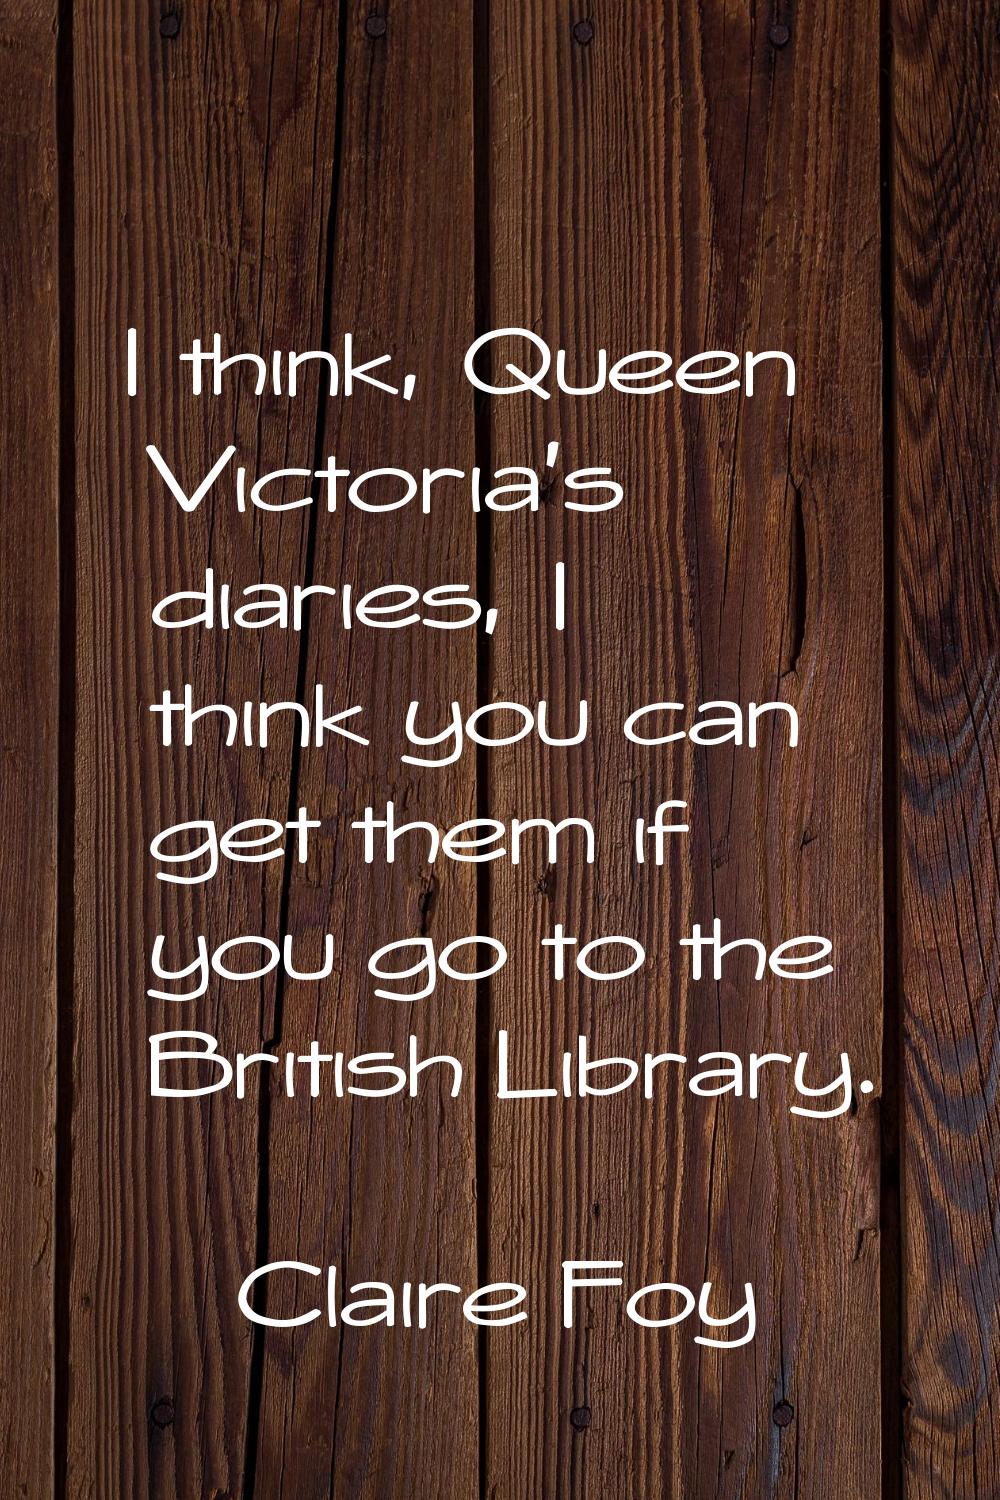 I think, Queen Victoria's diaries, I think you can get them if you go to the British Library.